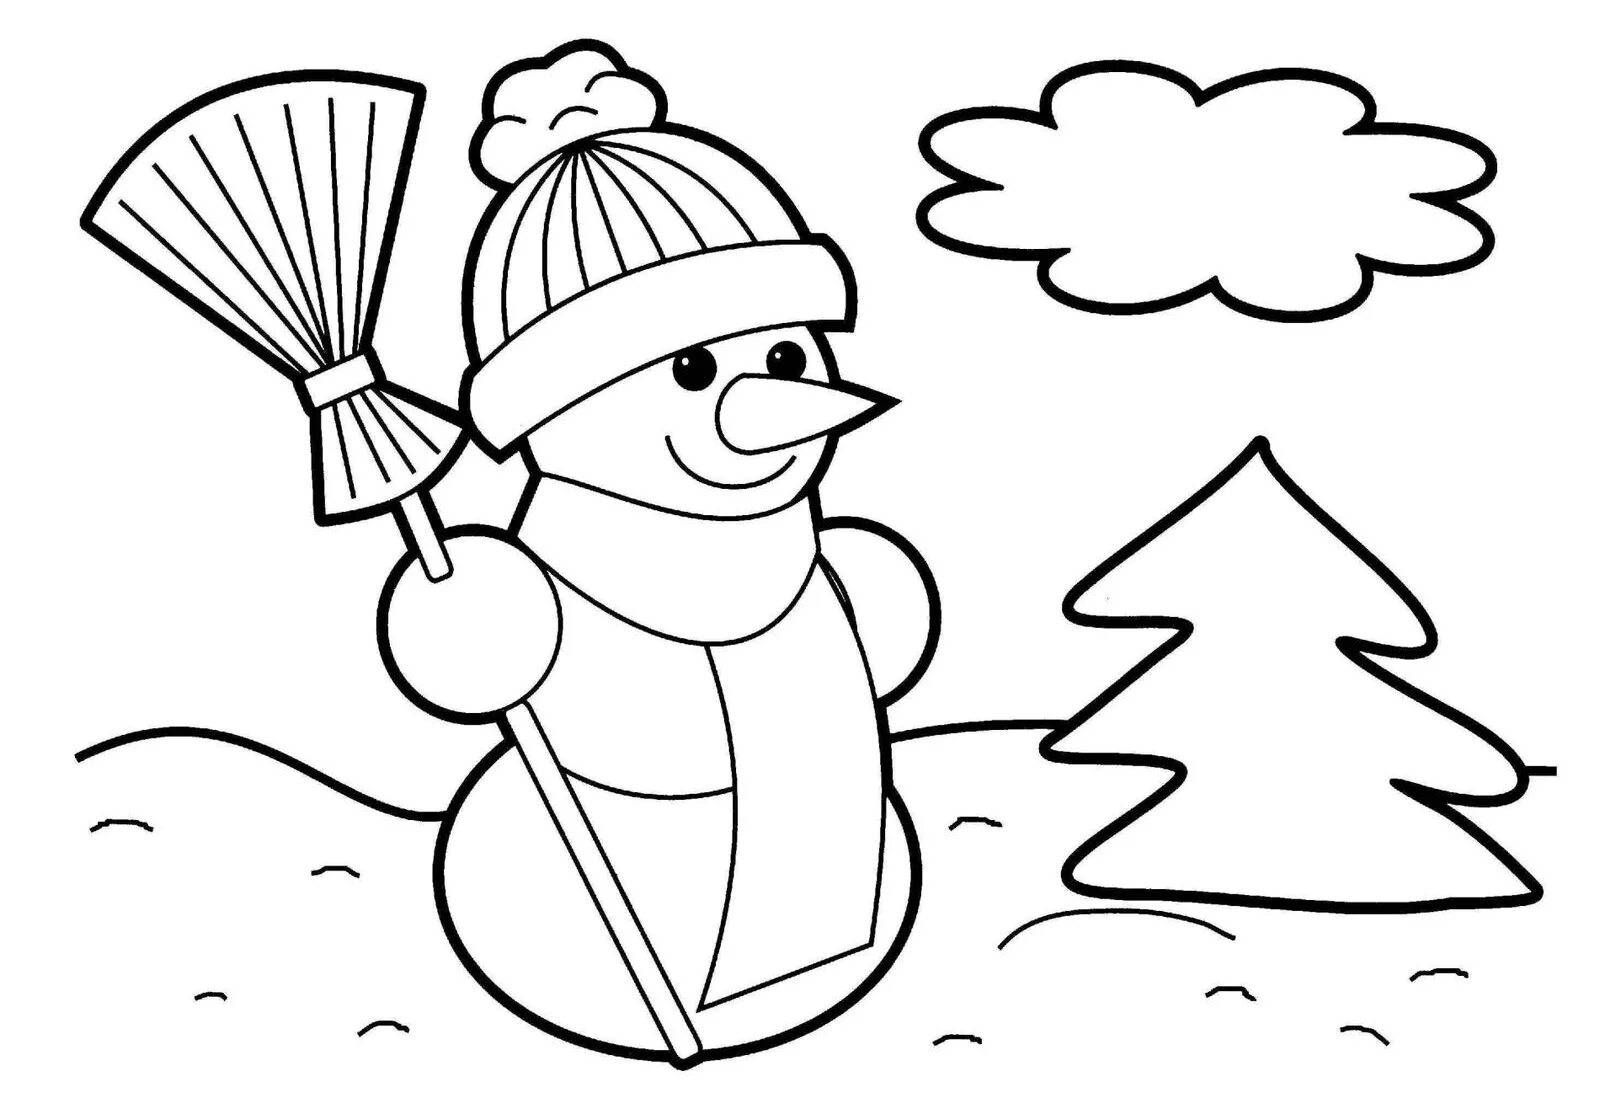 Glitter snowman coloring page